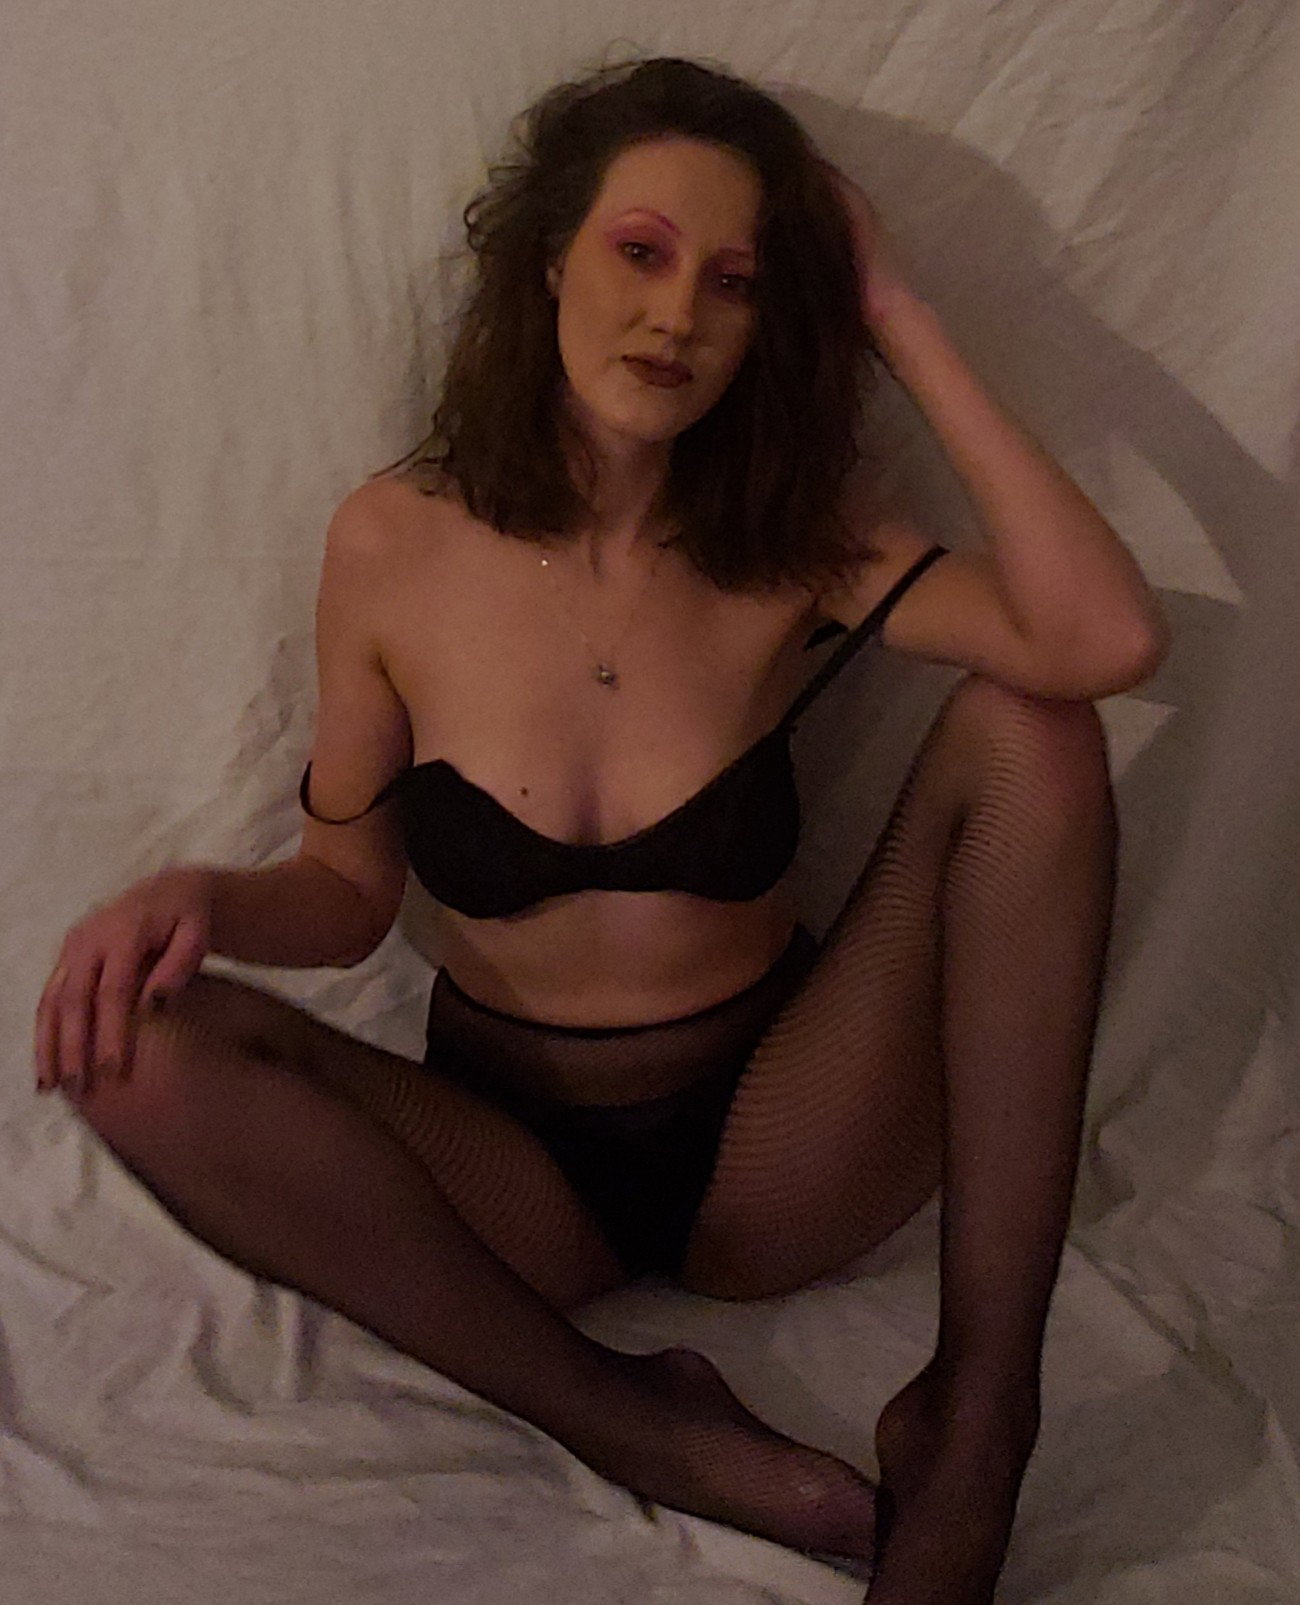 Photo by FIONA with the username @fionadazed, who is a star user,  December 3, 2019 at 7:51 AM. The post is about the topic Brunette Beauties and the text says 'want to see me get naked & get off with my lush?! live in 30 mins
https://chaturbate.com/b/fionadazed/ #cute #brunette #chaturbate #teen #natural #squirt #cum #naughty #legs #lingerie #dildo #lush #blowjob #fun #sweet #naked #livecams #cam #internetmodel'